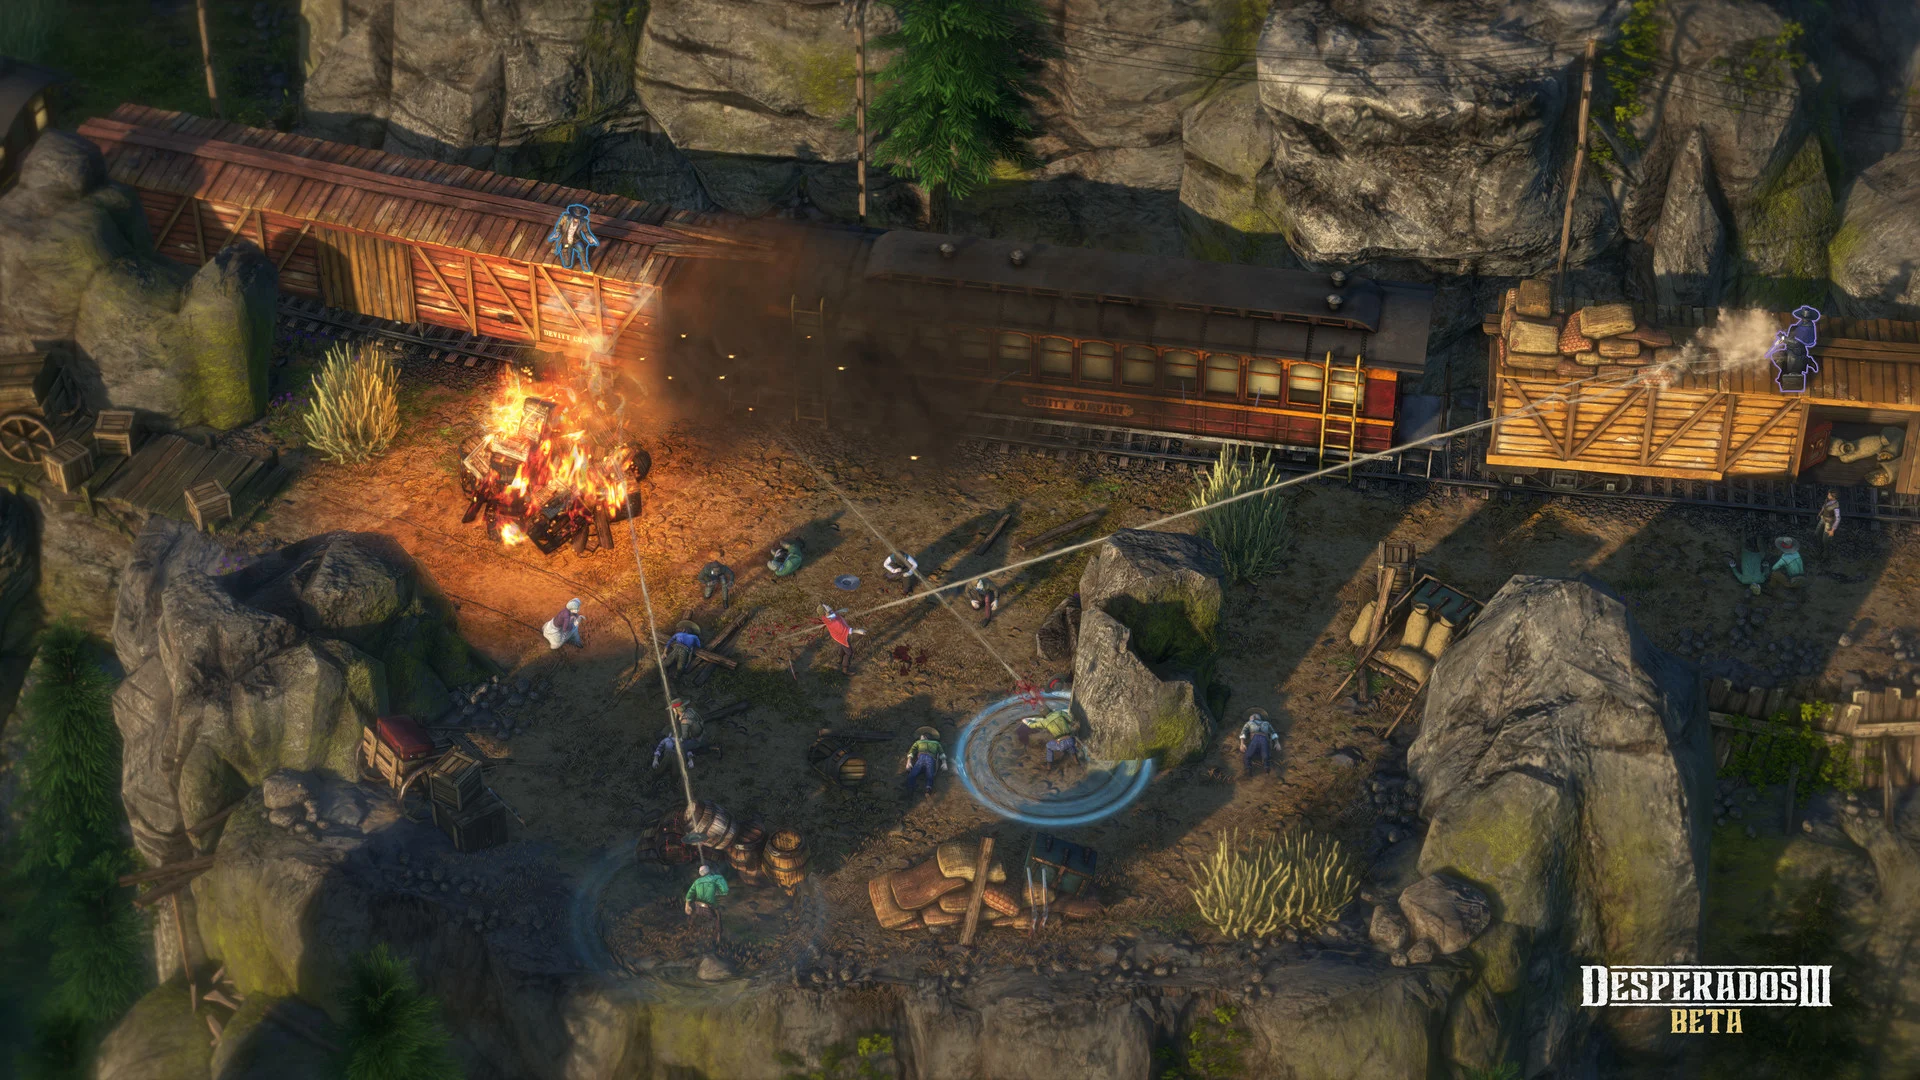 Review: Desperados III - a tactical strategy title set in the Wild